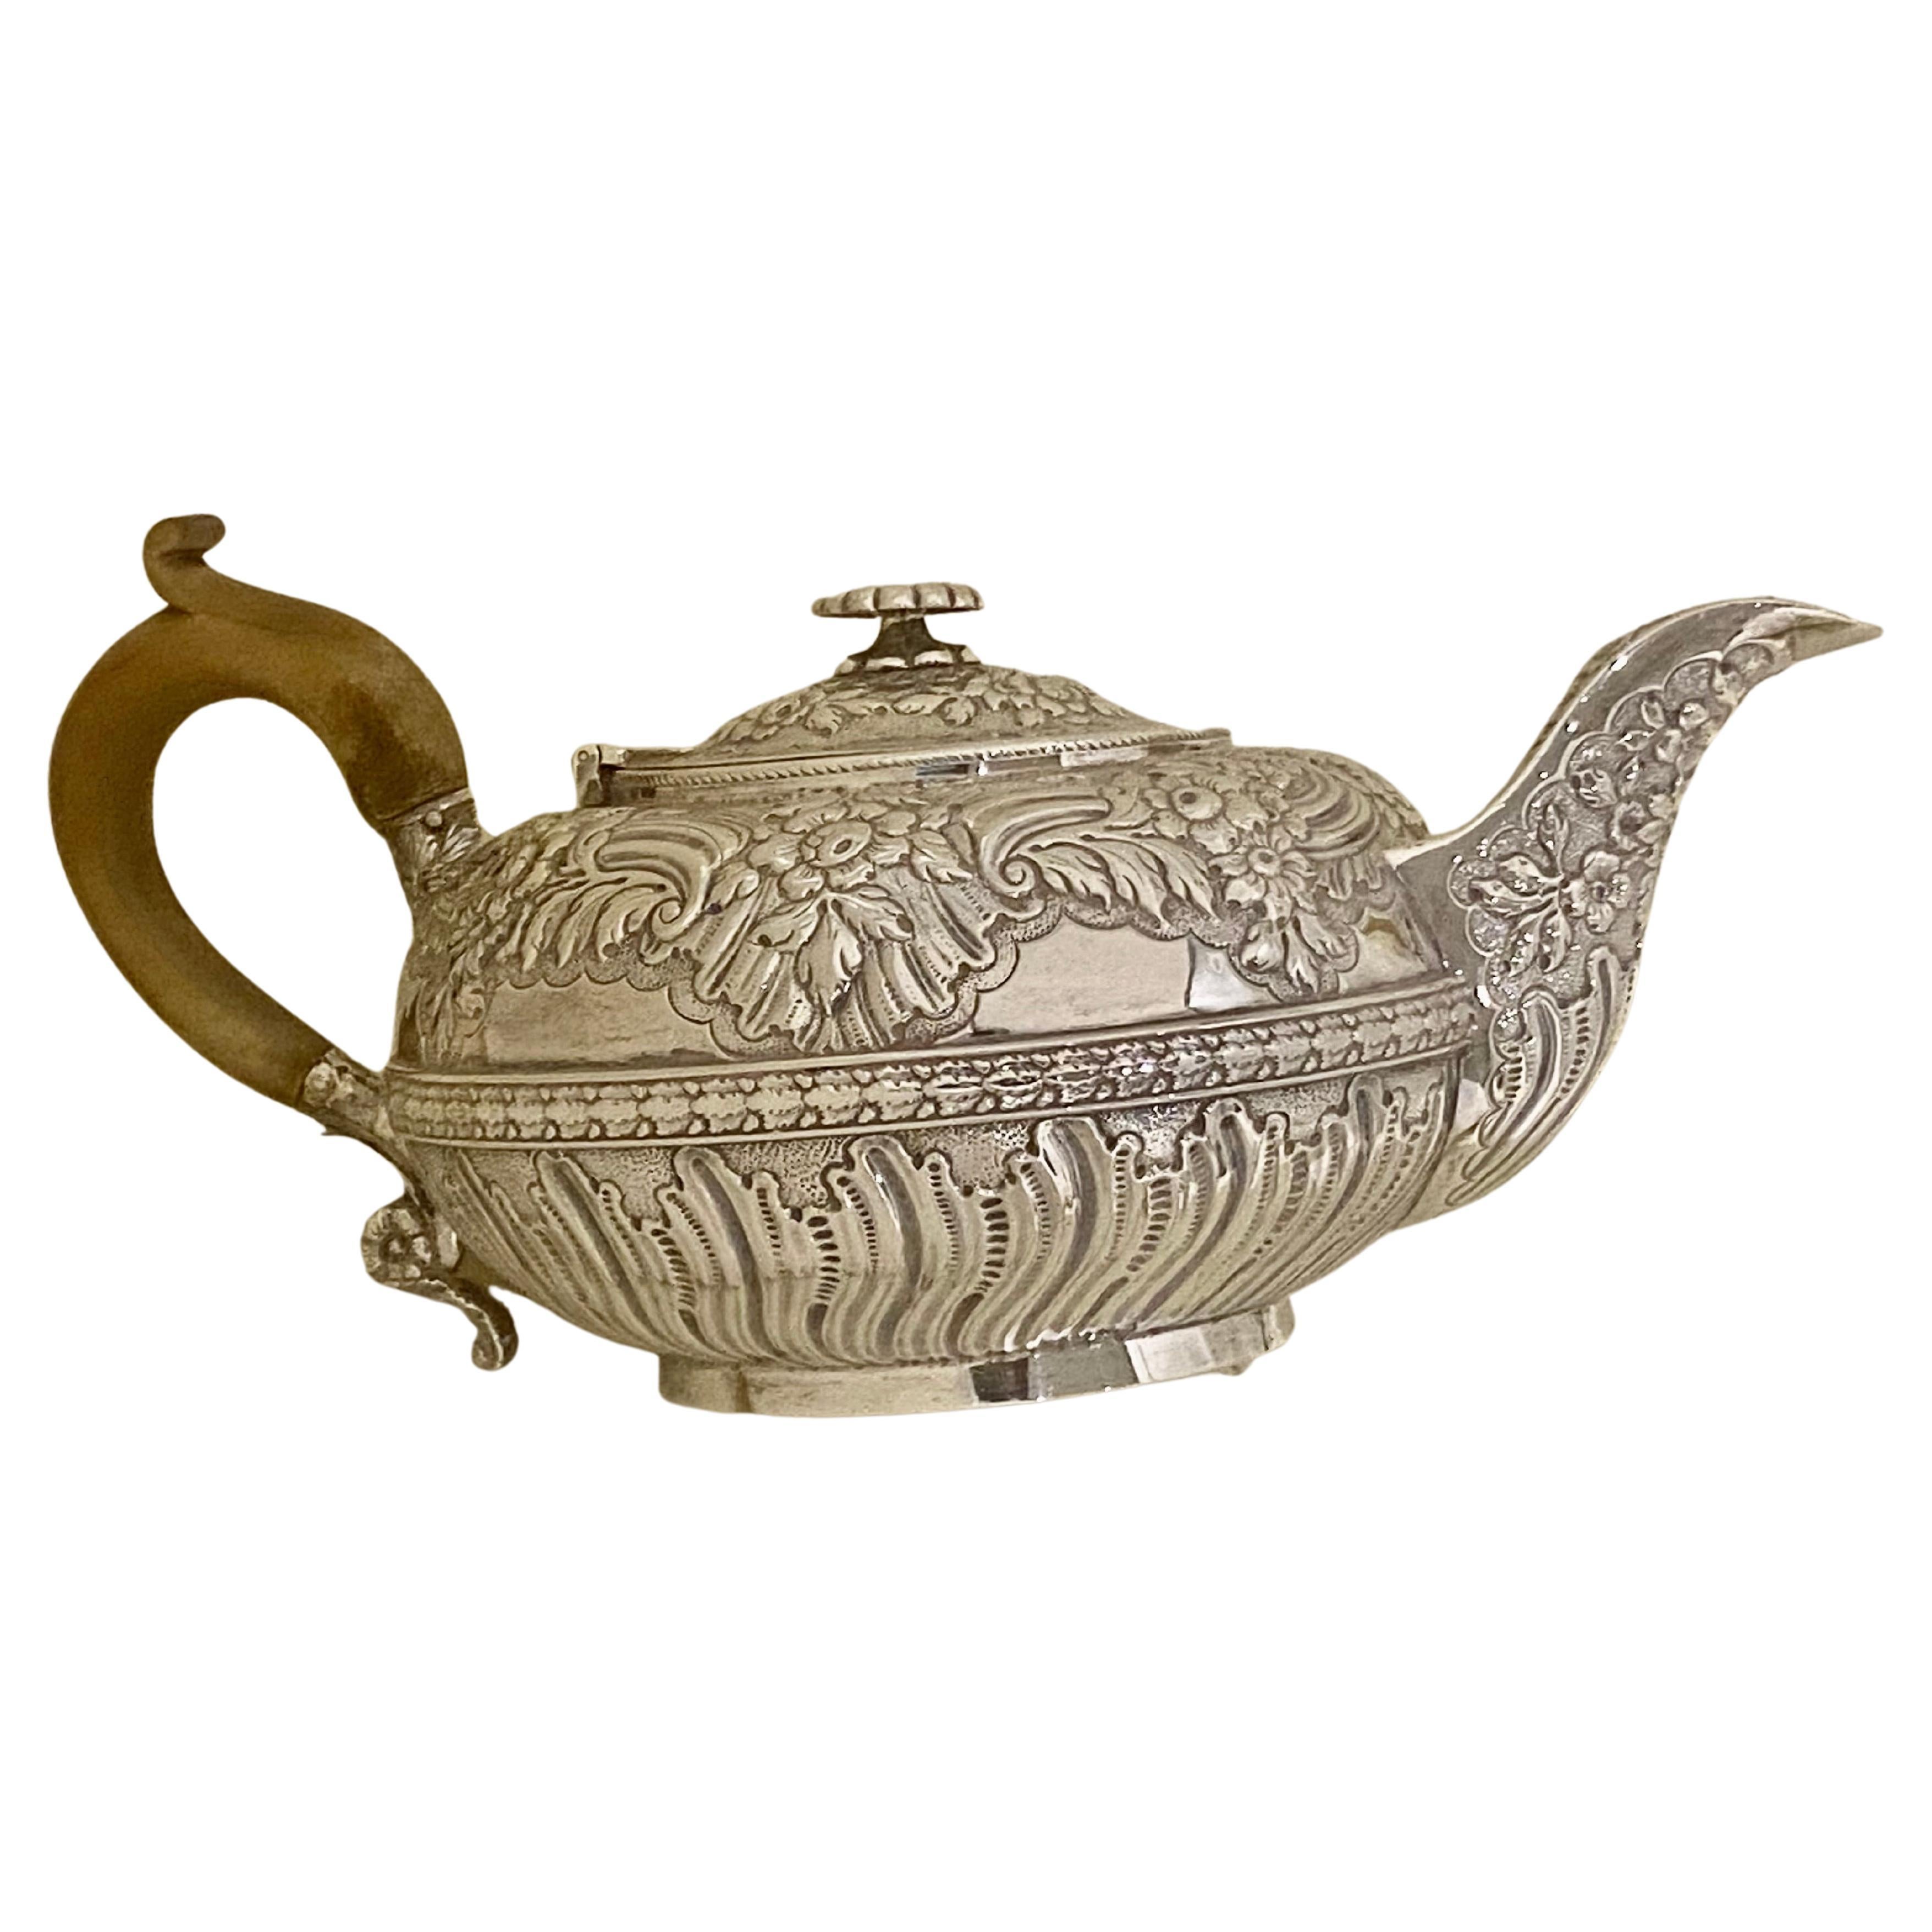 A stunningly beautiful large circular English Sterling silver teapot, beautifully floral embossed throughout 
This is a superb example of a antique George III solid sterling silver teapot,  weighing 630 grams. 20.25 troy Onces and measuring 10.5